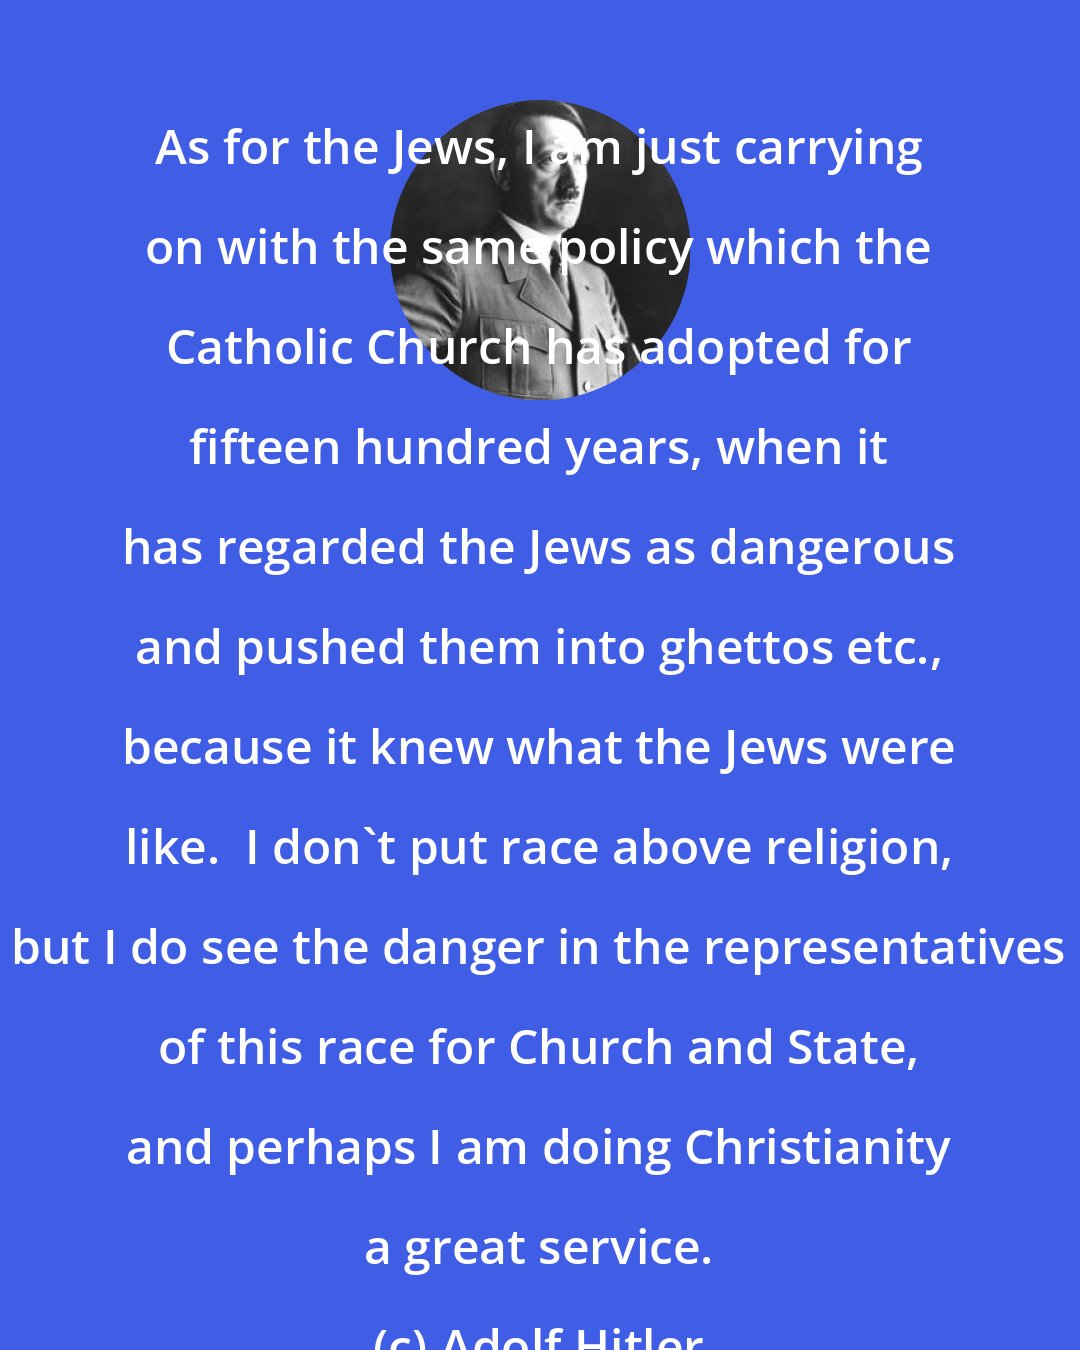 Adolf Hitler: As for the Jews, I am just carrying on with the same policy which the Catholic Church has adopted for fifteen hundred years, when it has regarded the Jews as dangerous and pushed them into ghettos etc., because it knew what the Jews were like.  I don't put race above religion, but I do see the danger in the representatives of this race for Church and State, and perhaps I am doing Christianity a great service.